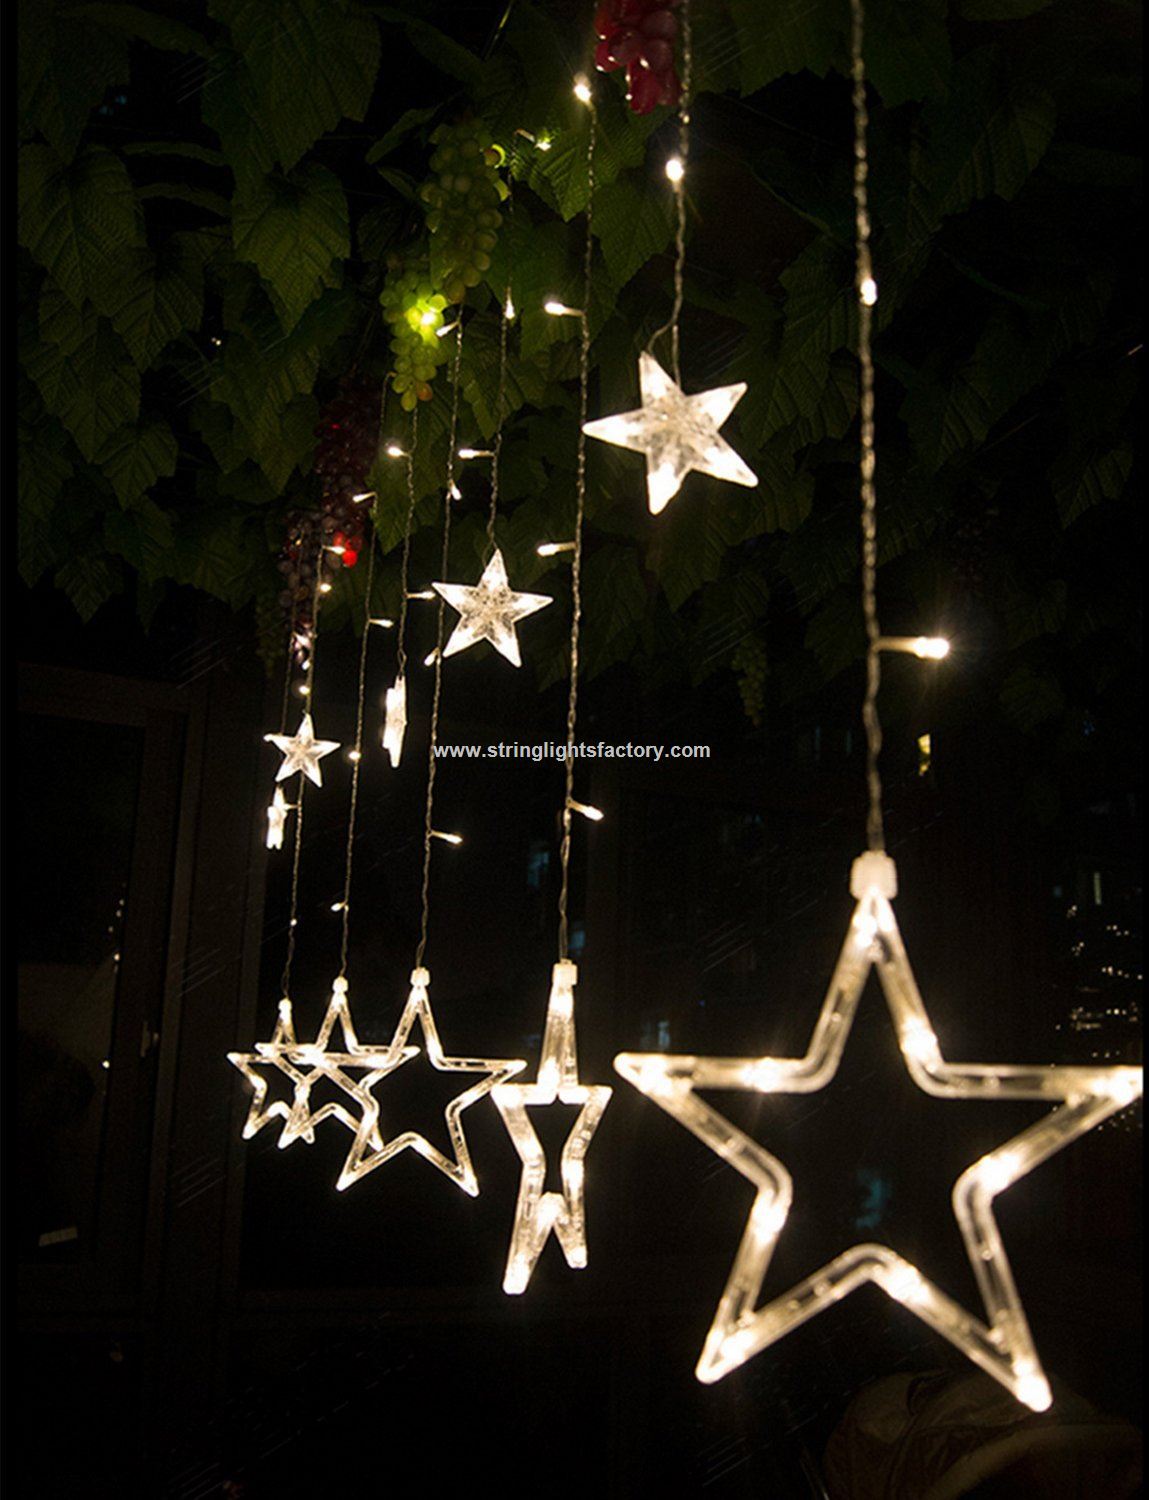 Wholesale Price Decorative Star Strand Lights Powered by 4XAA Batteries 138LEDs 12 Stars Lights